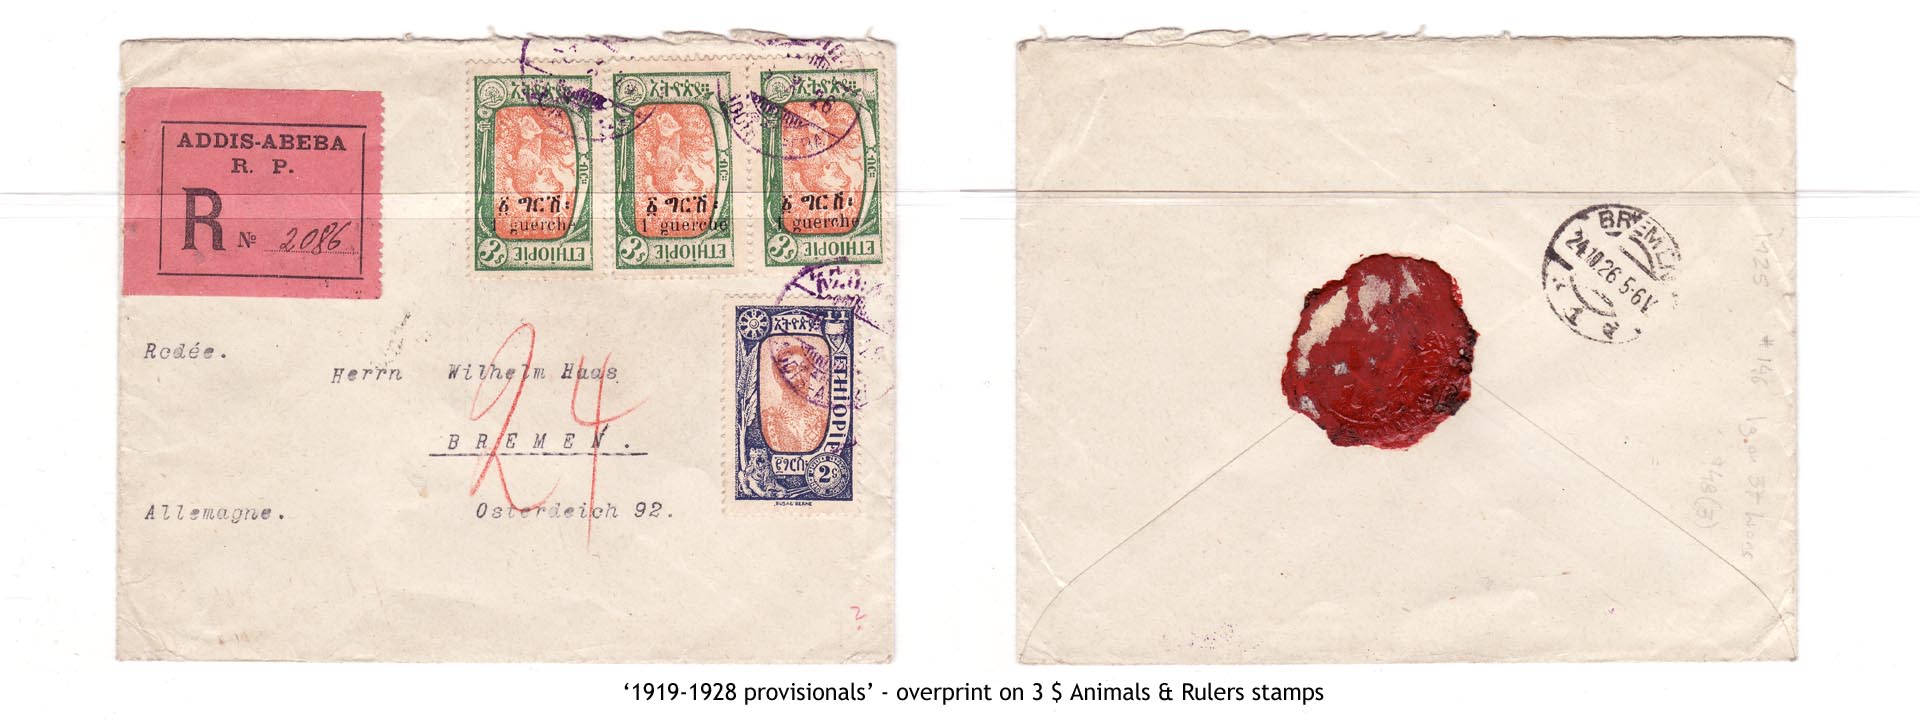 1919-1928 provisionals’ – overprint on 3$ Animals & Rulers stamps